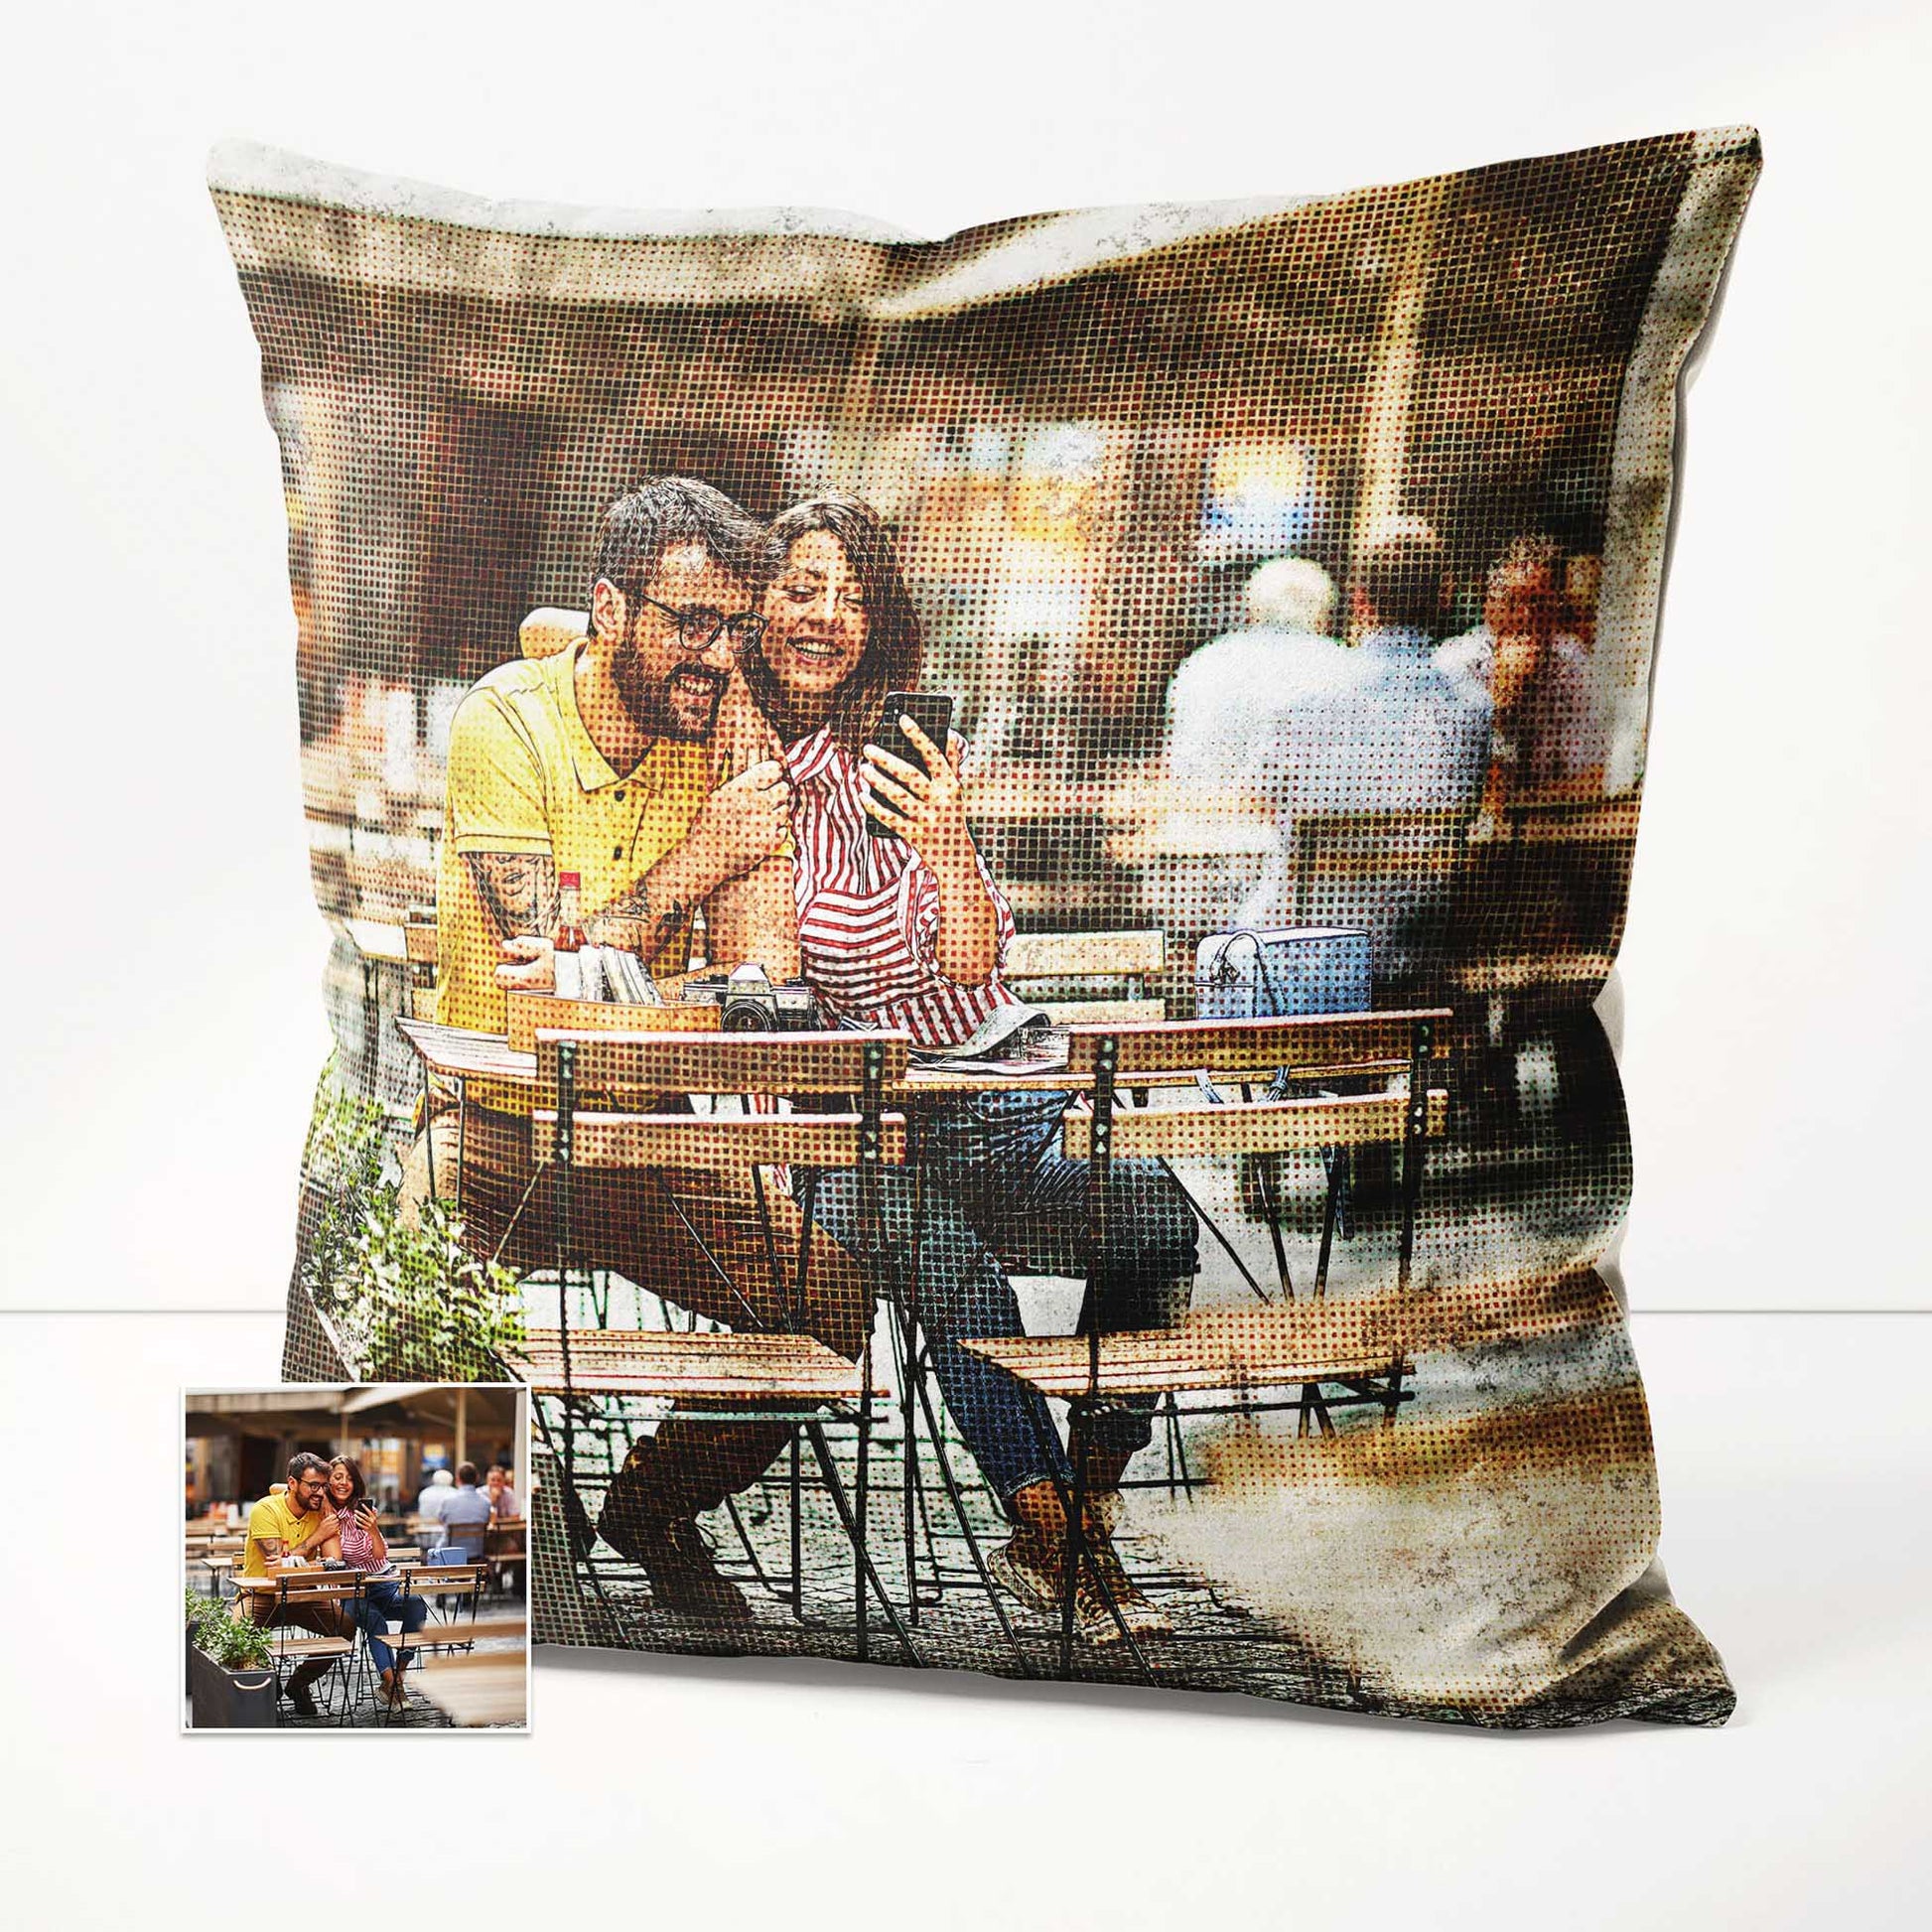 Elevate your home decor with the Personalised Grunge FX Cushion, a true masterpiece for art enthusiasts. Its distressed print from your photo creates a unique and original artwork, while the soft velvet material adds a luxurious feel